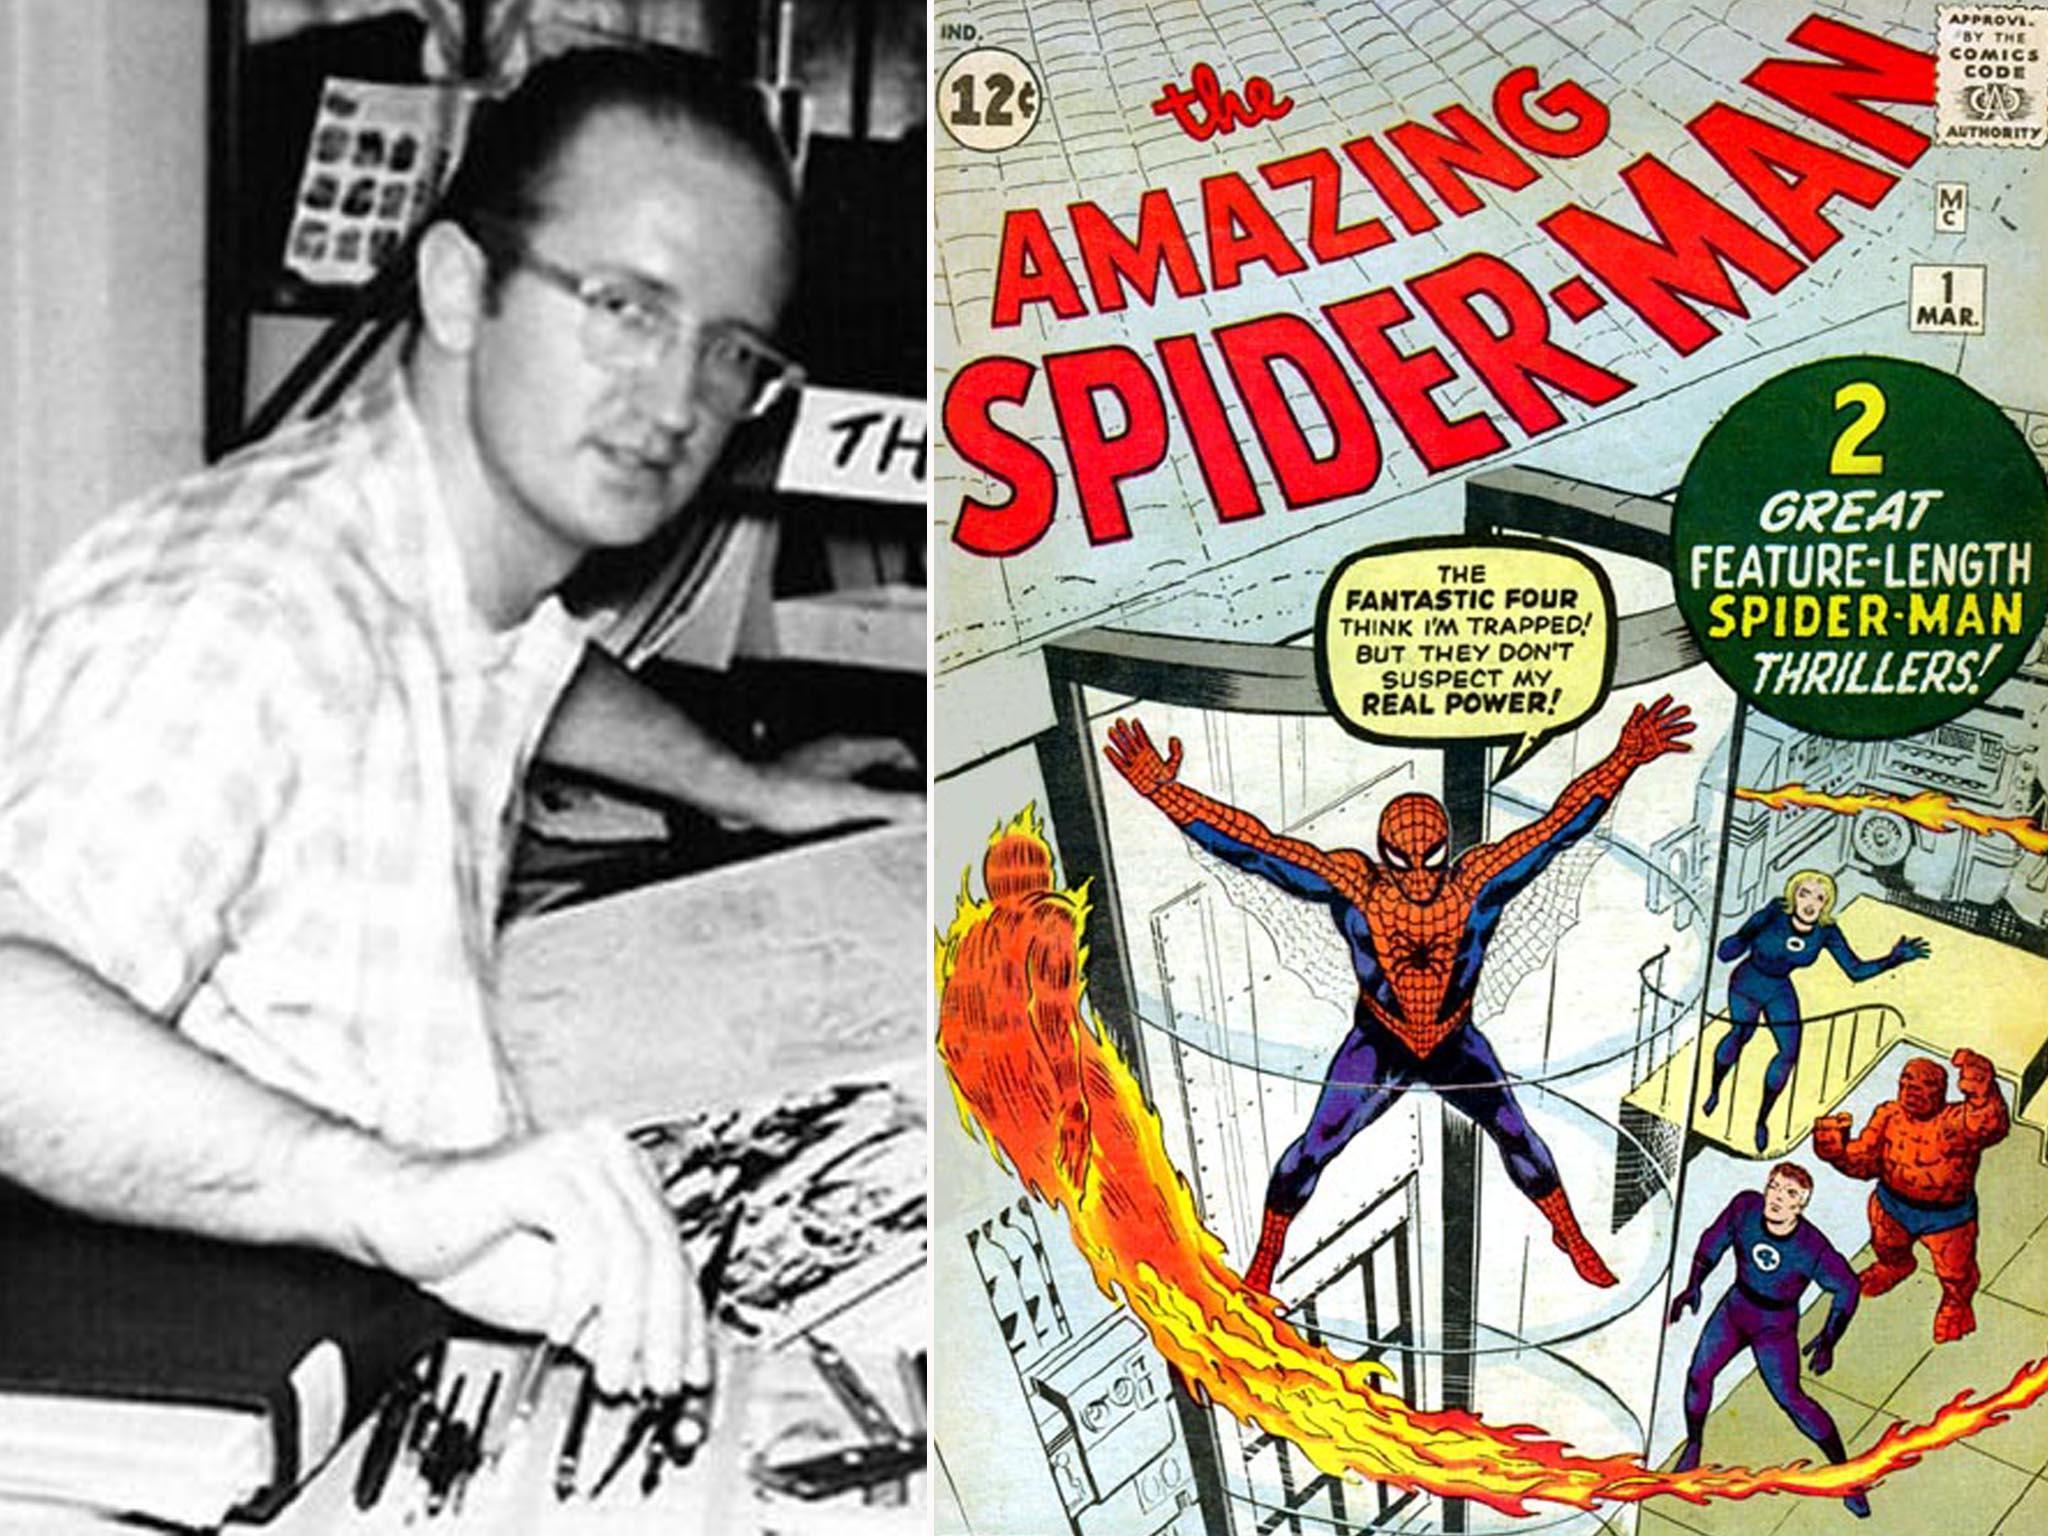 Ditko worked with Marvel for 38 issues of Spider-Man